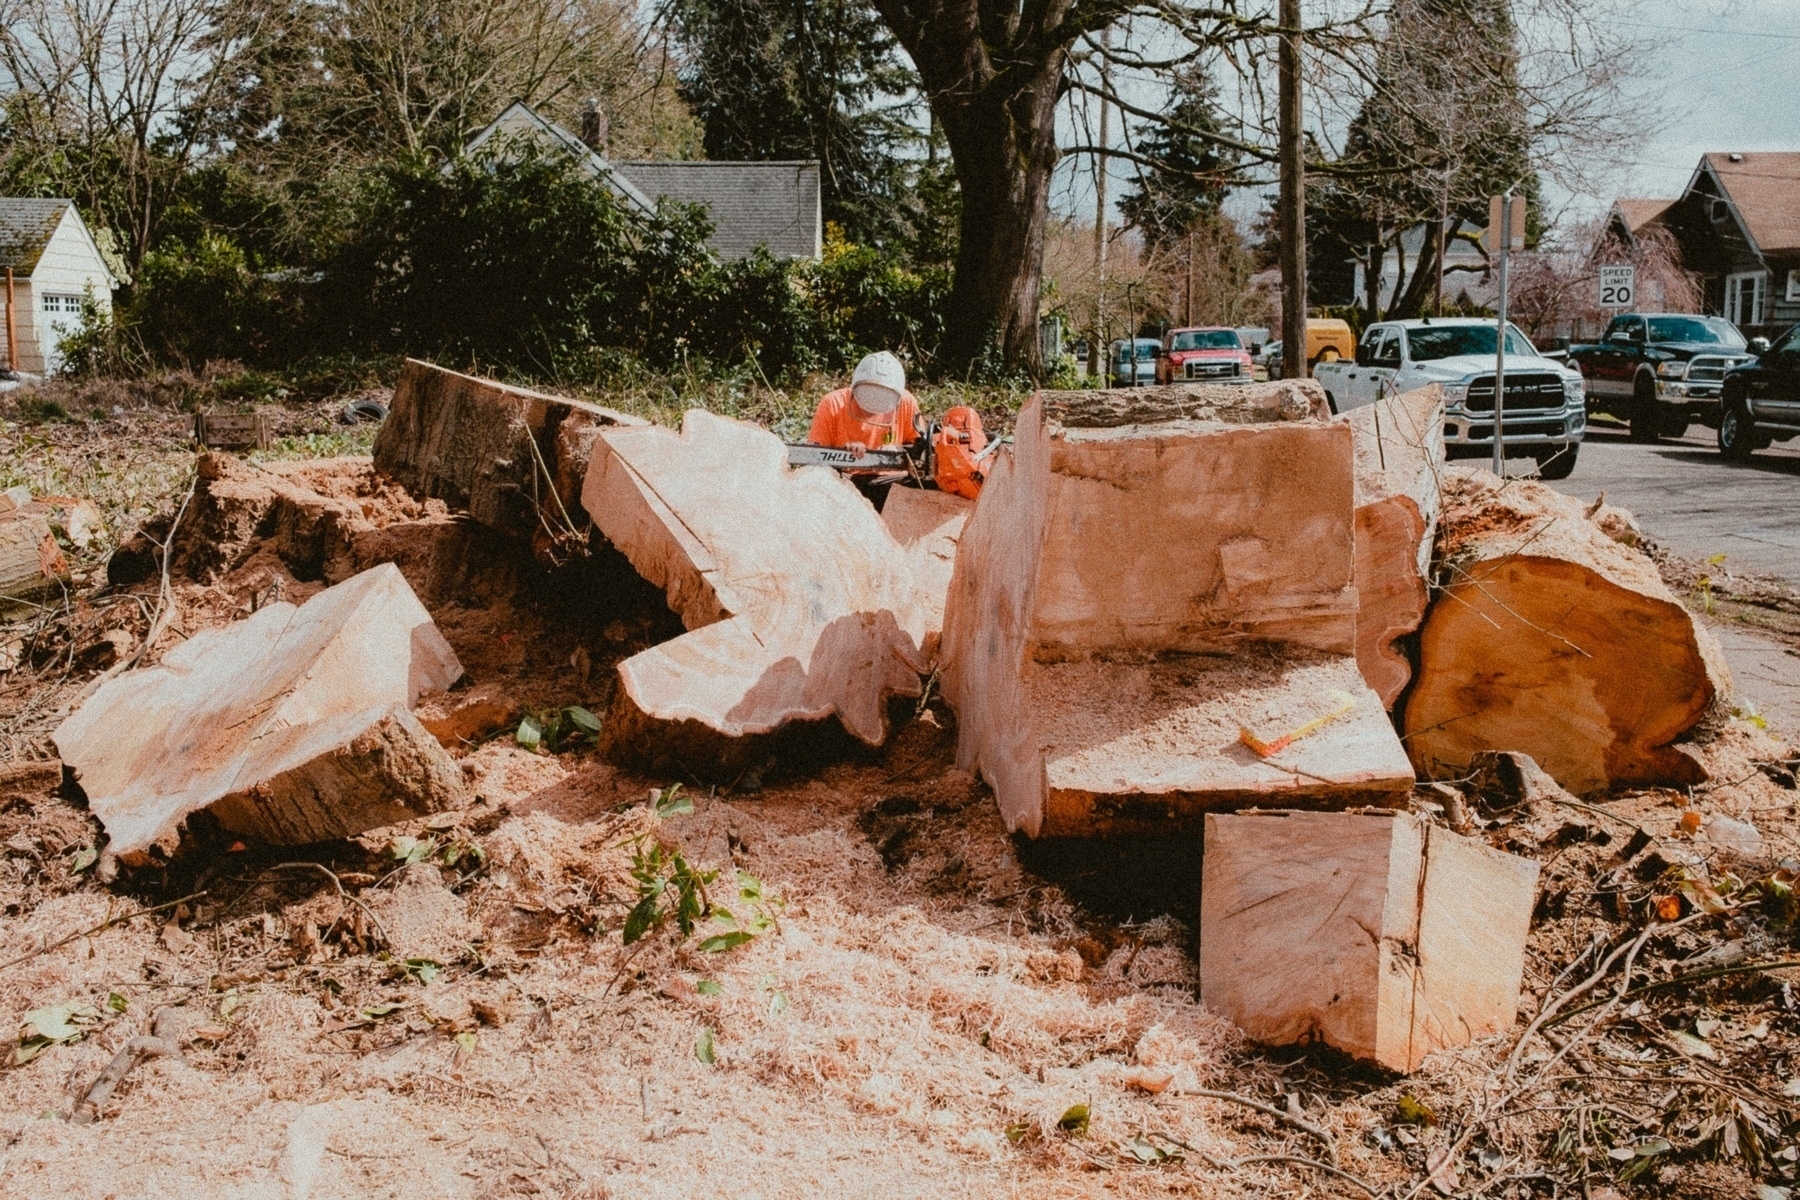 A man in workwear examines a chainsaw seated within a pile of large chopped up tree trunk pieces.